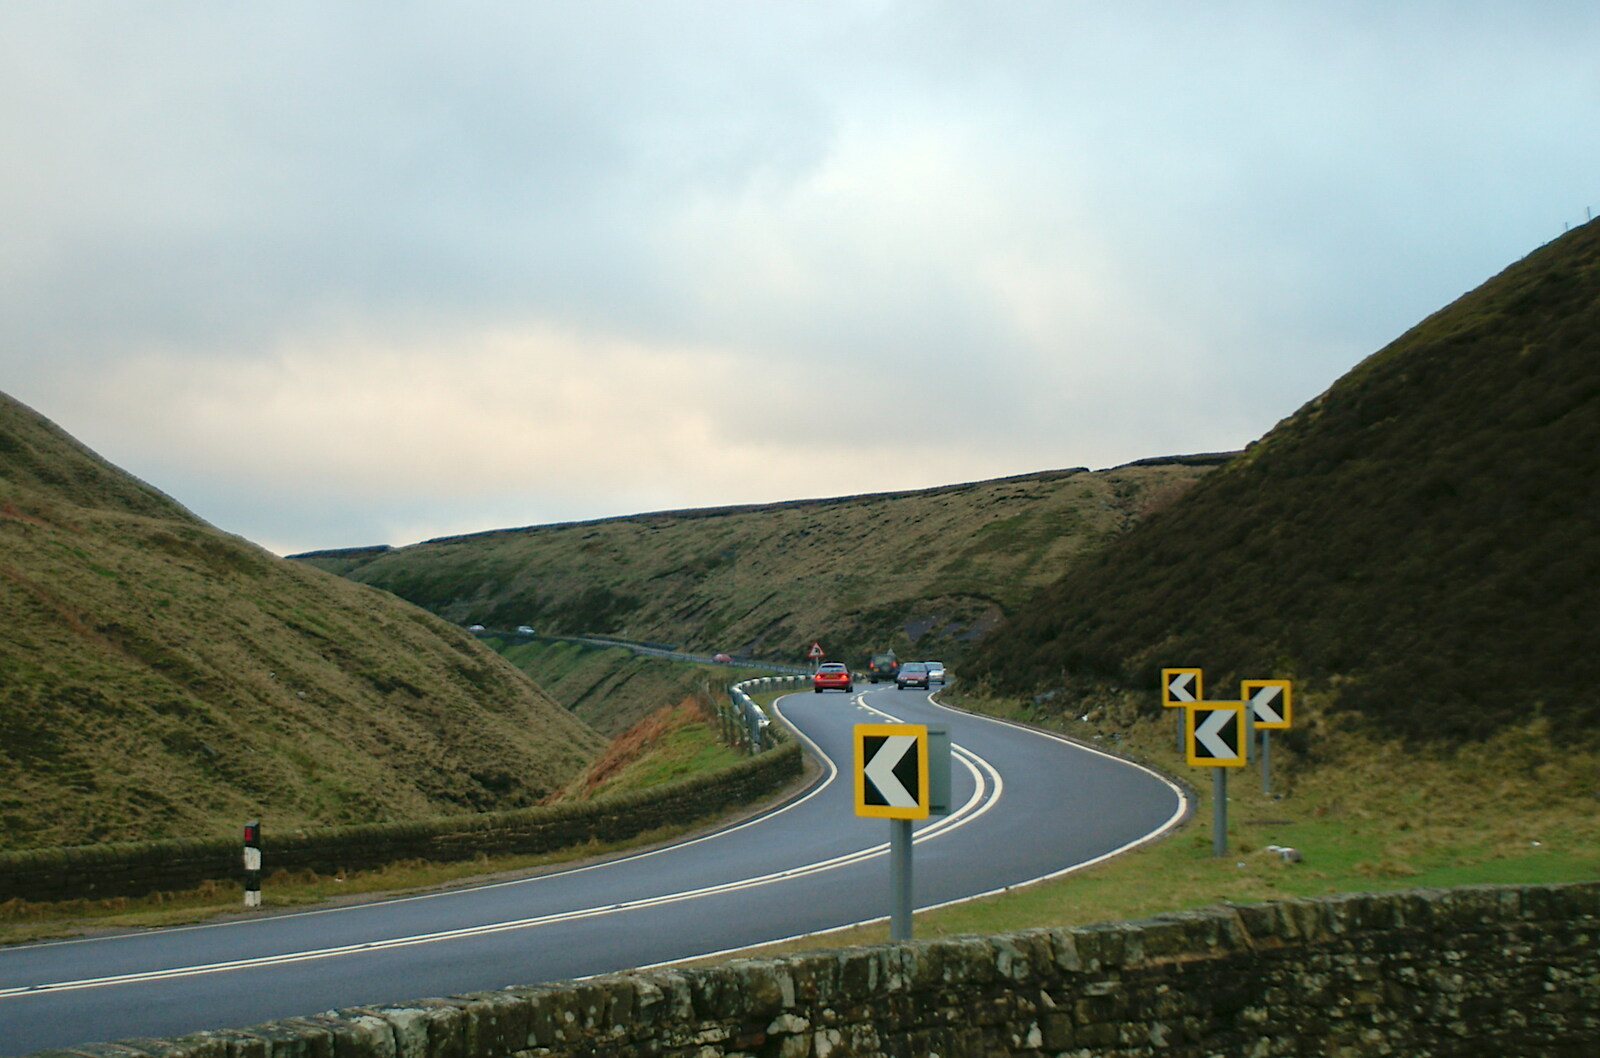 Driving Around Oop North, Hoylandswain, West Yorkshire - 30th January 2005: Snake Pass in Derbyshire